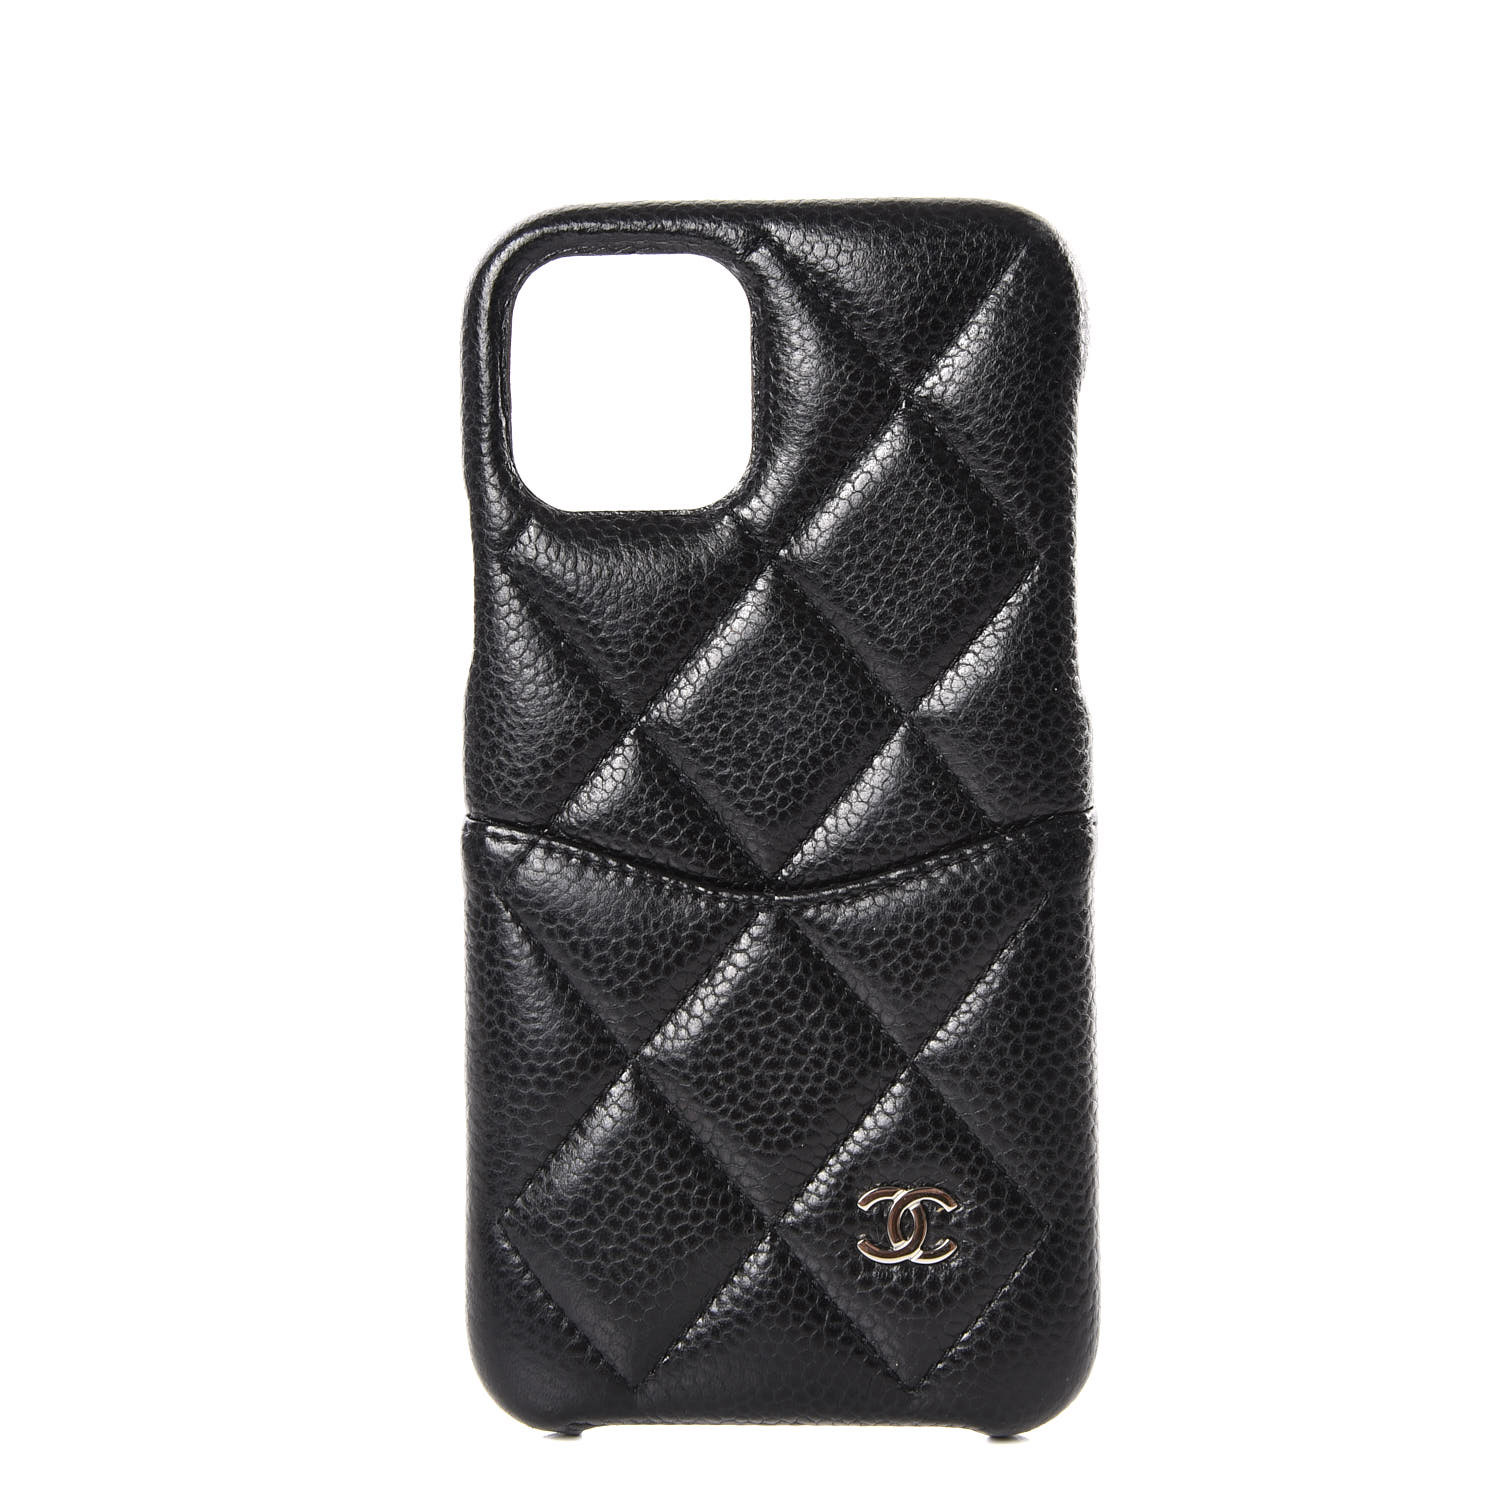 Chanel Grained Lambskin Quilted Iphone Xi Pro Coco Tech Case Black 5487 Fashionphile